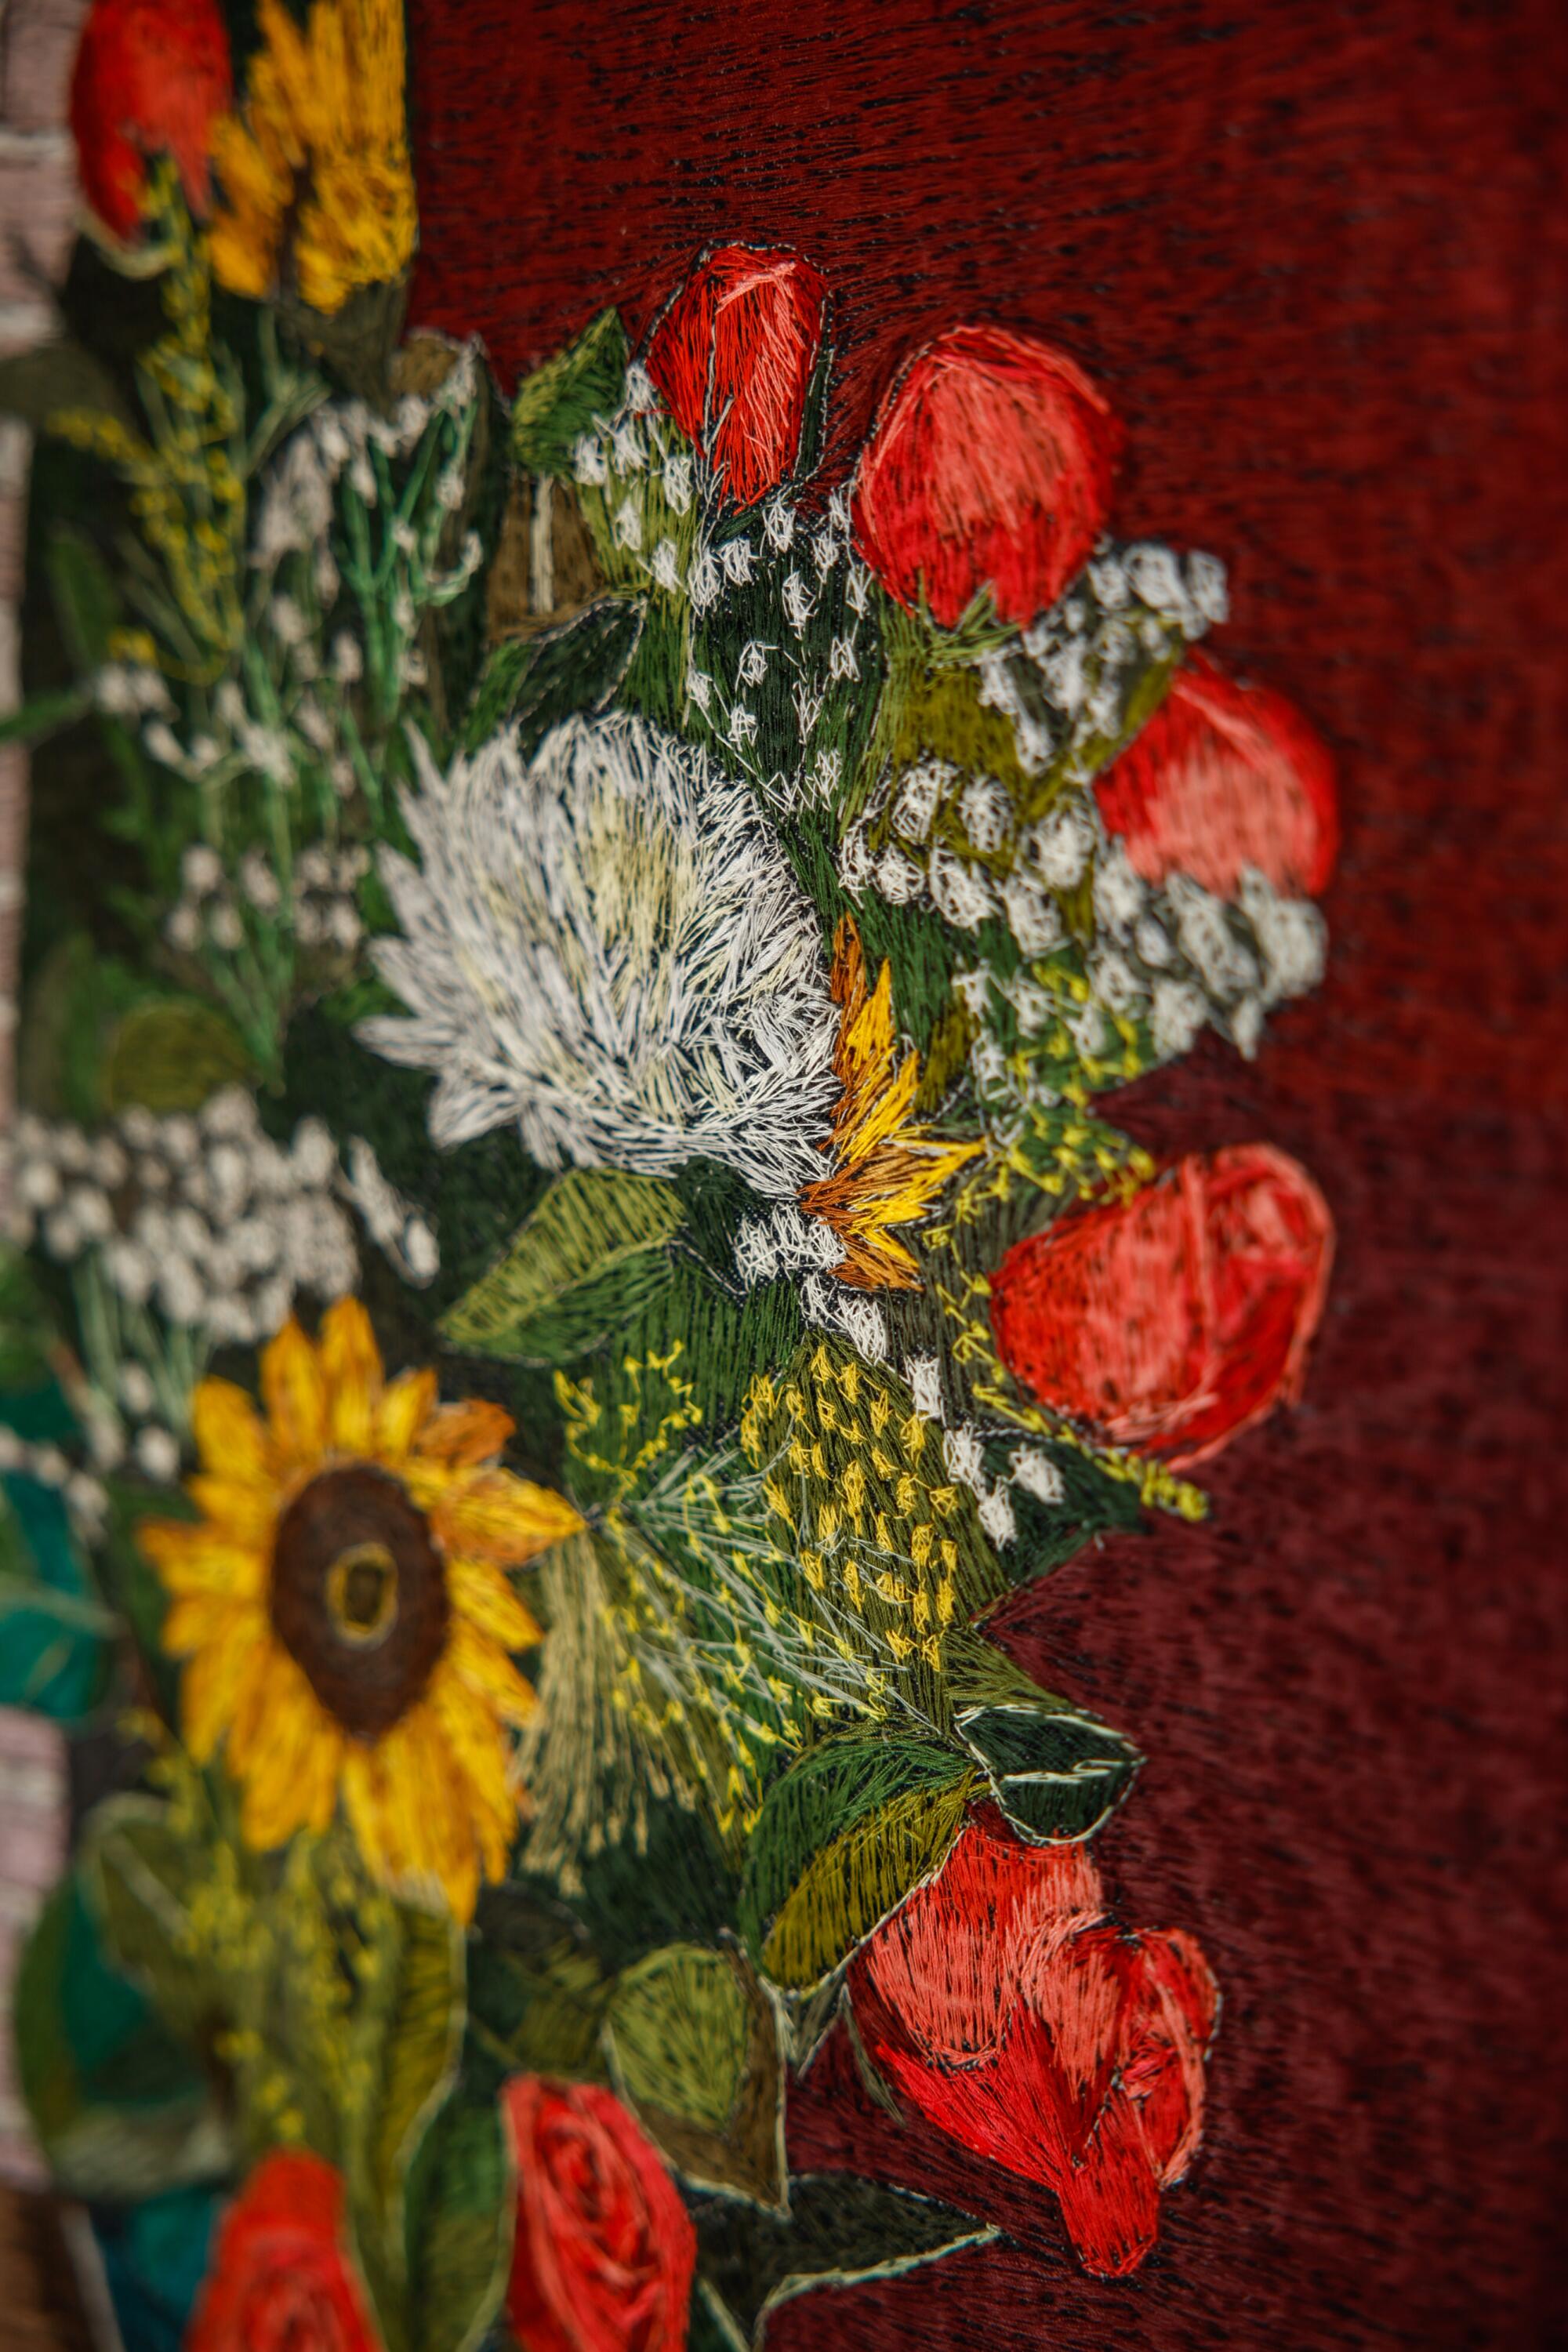 A close-up image of textile flowers.